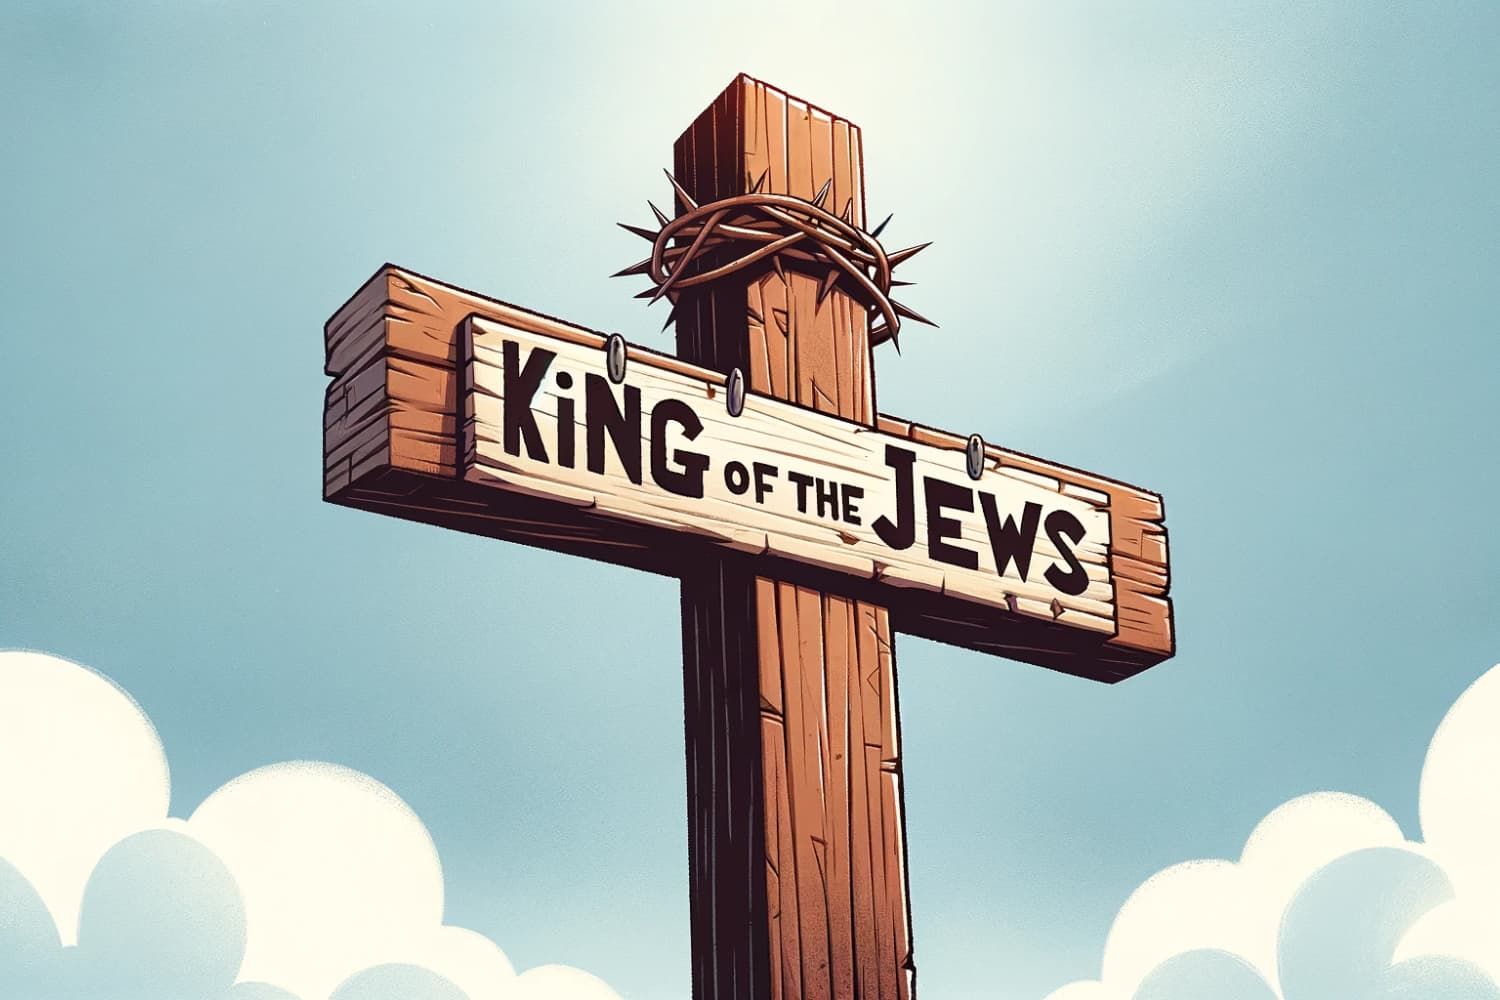 Lesson%20-%20NT%20Easter%2006%20-%20Jesus%20king%20of%20the%20Jews-1a7fec3c Jesus - His death